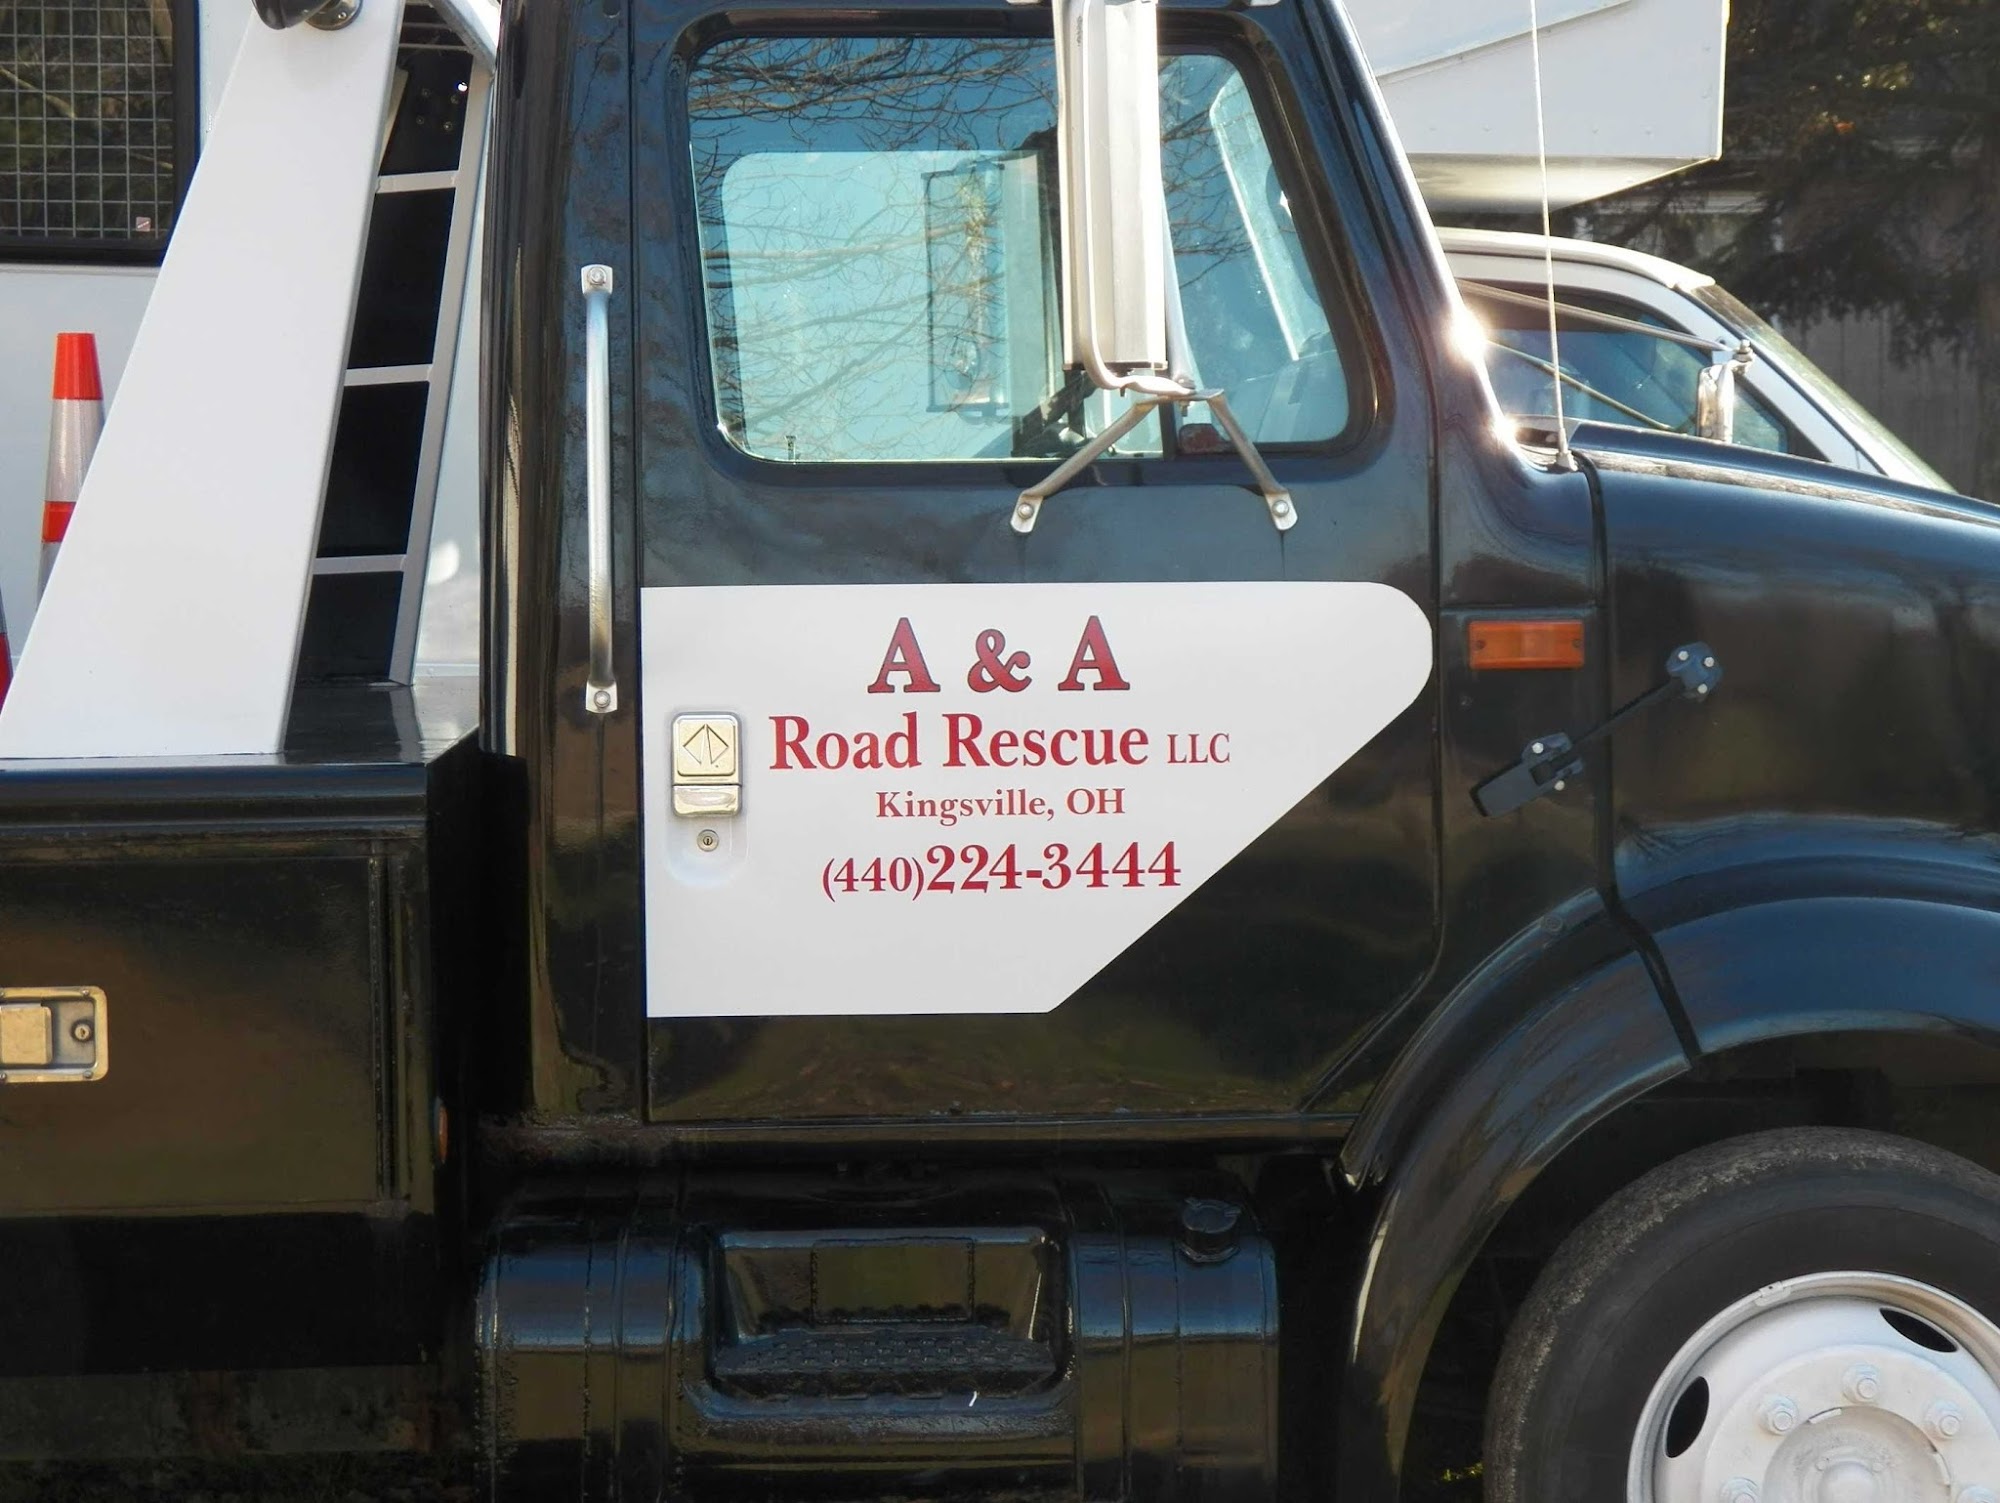 A & A Road Rescue LLC 5423 OH-193, Kingsville Ohio 44048